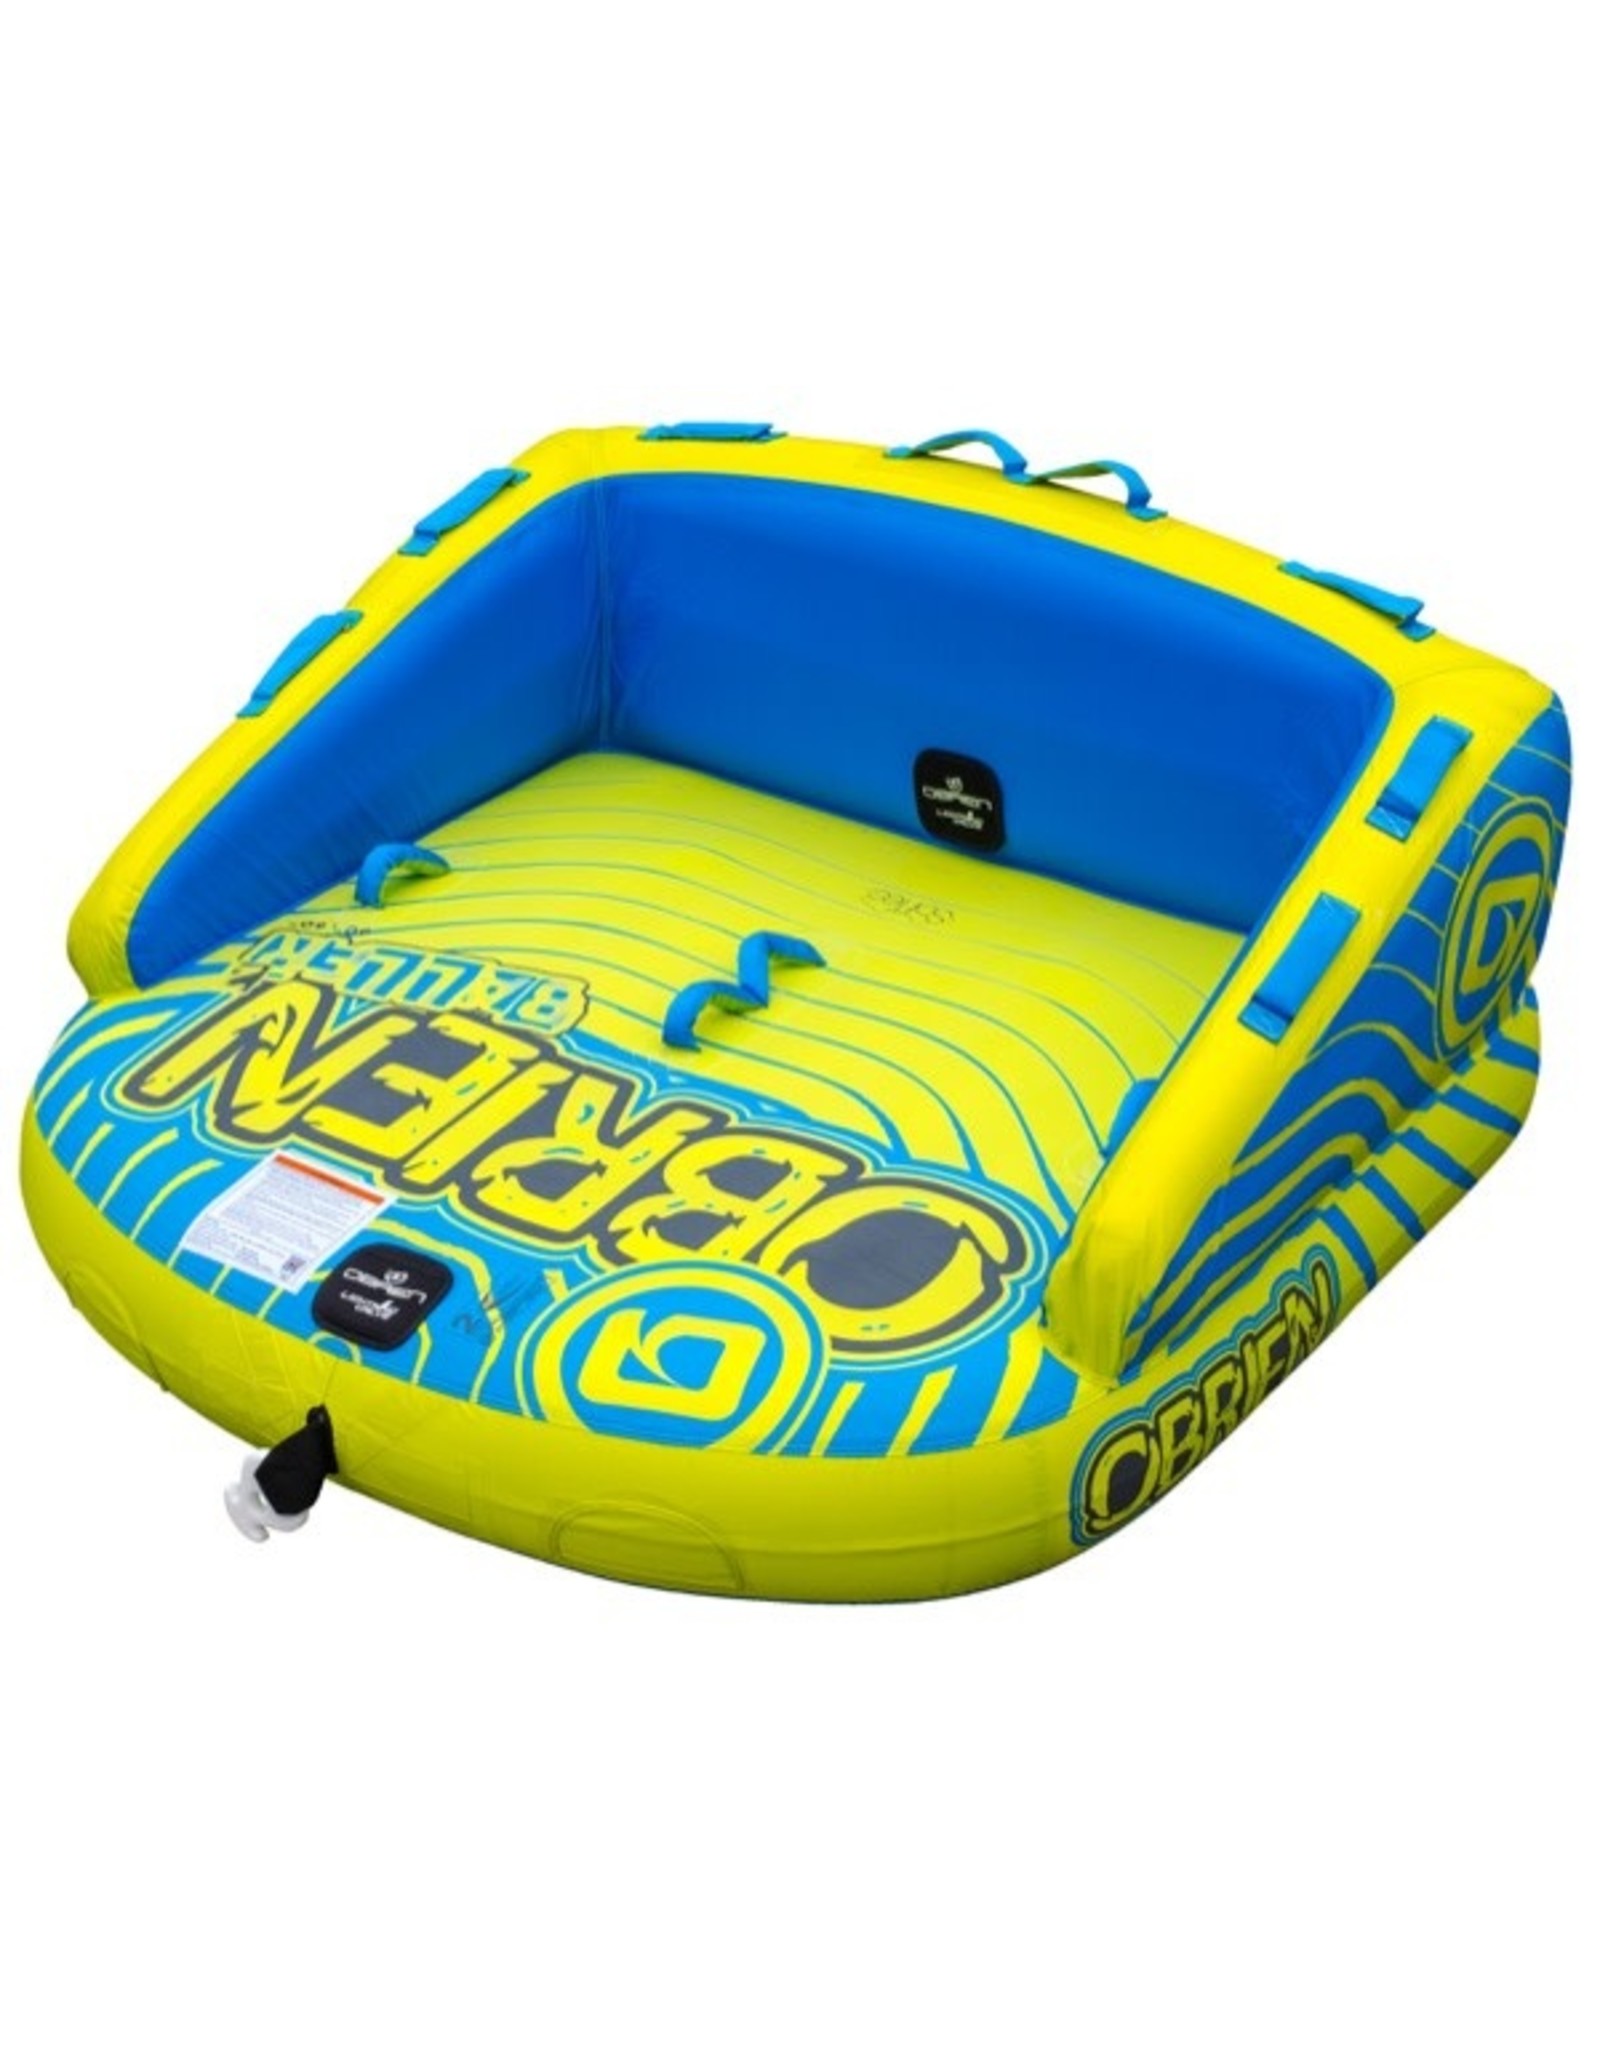 The Baller 2 is our best selling couch style tube at Sun Sports. It features a high back rest, plenty of handles, and soft top technology. 